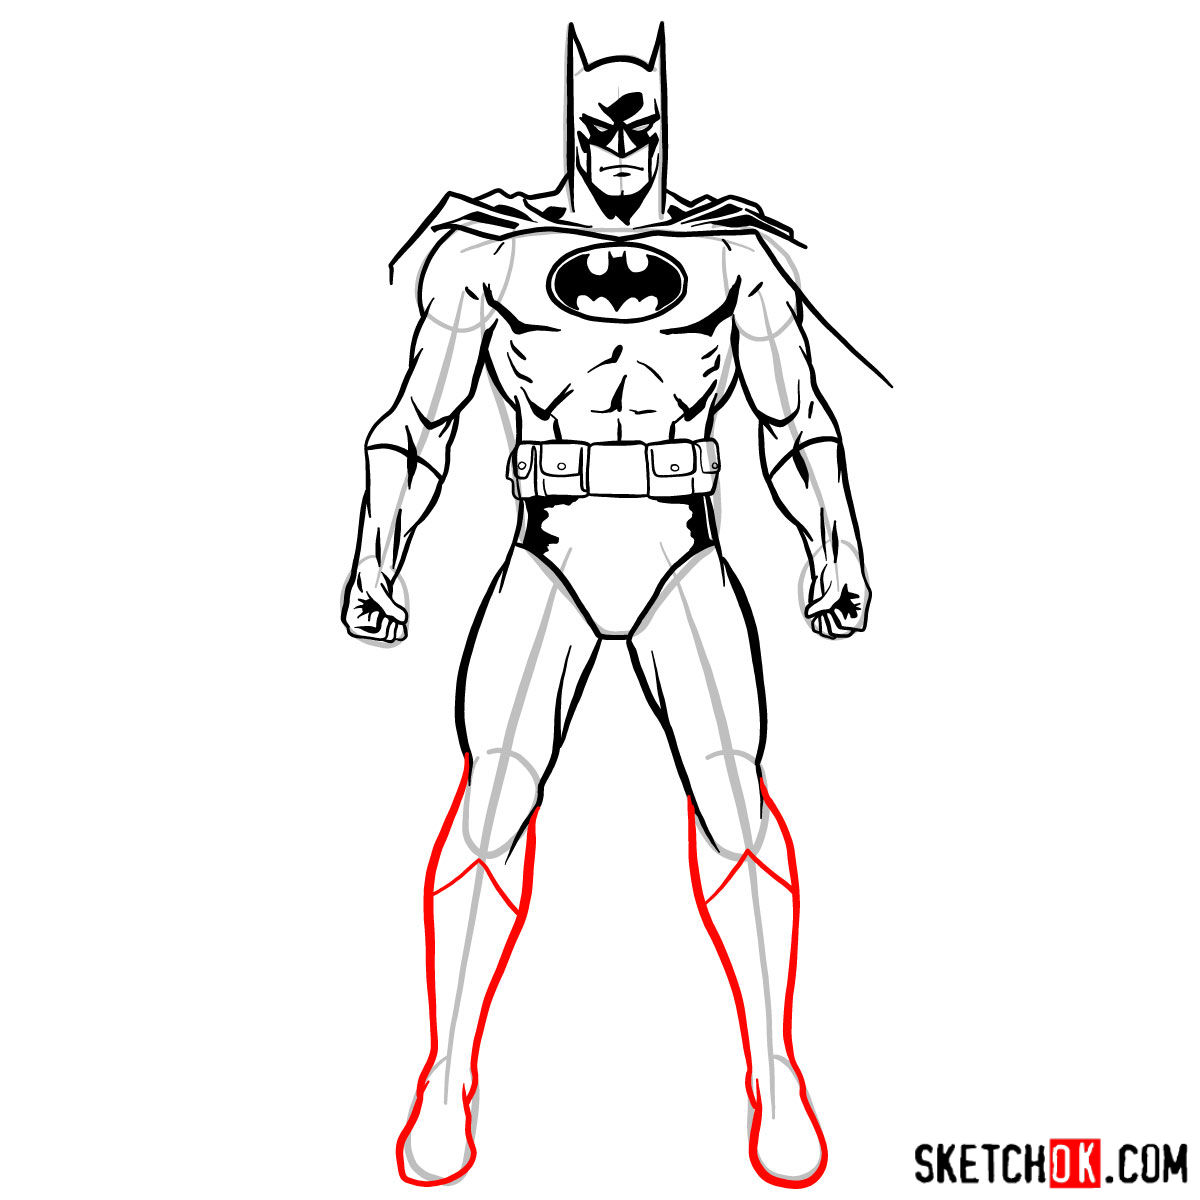 How to draw Batman in classic suit - step 13